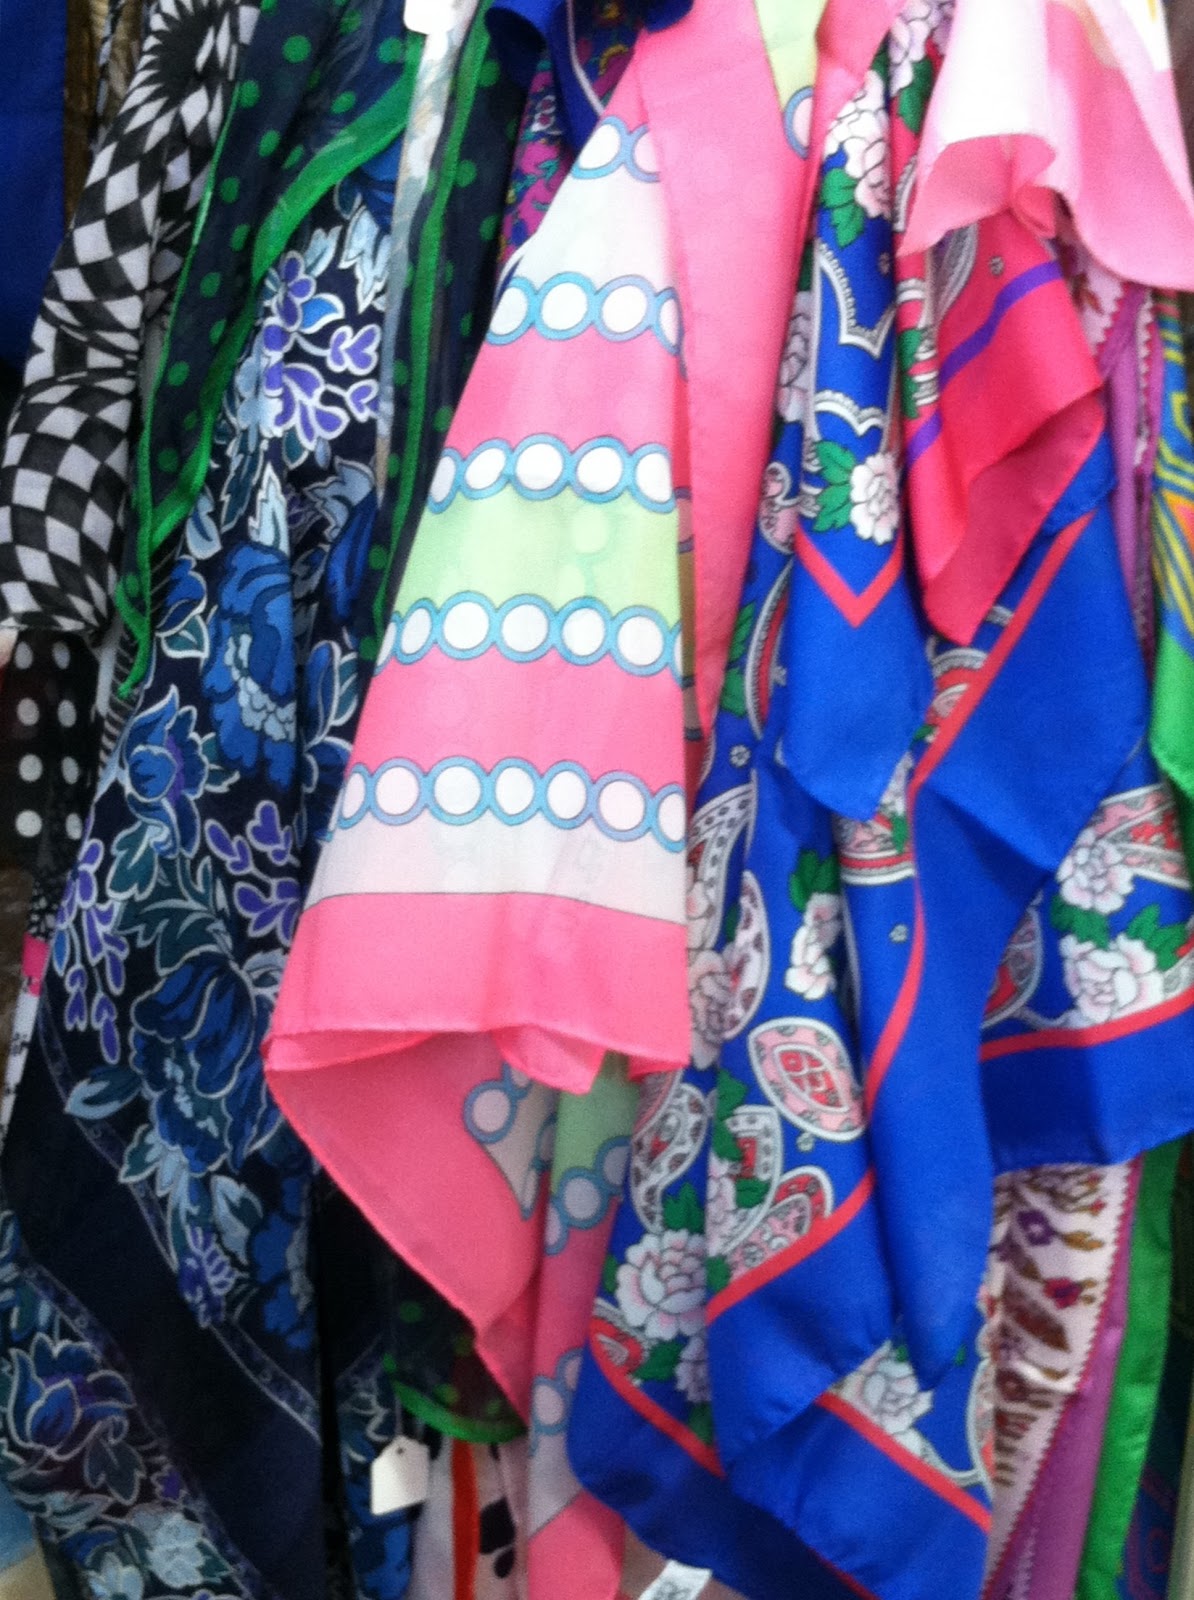 Somewhere In Time Antiques Shop: THE ULTIMATE SCARF BLOG & WHERE TO ...